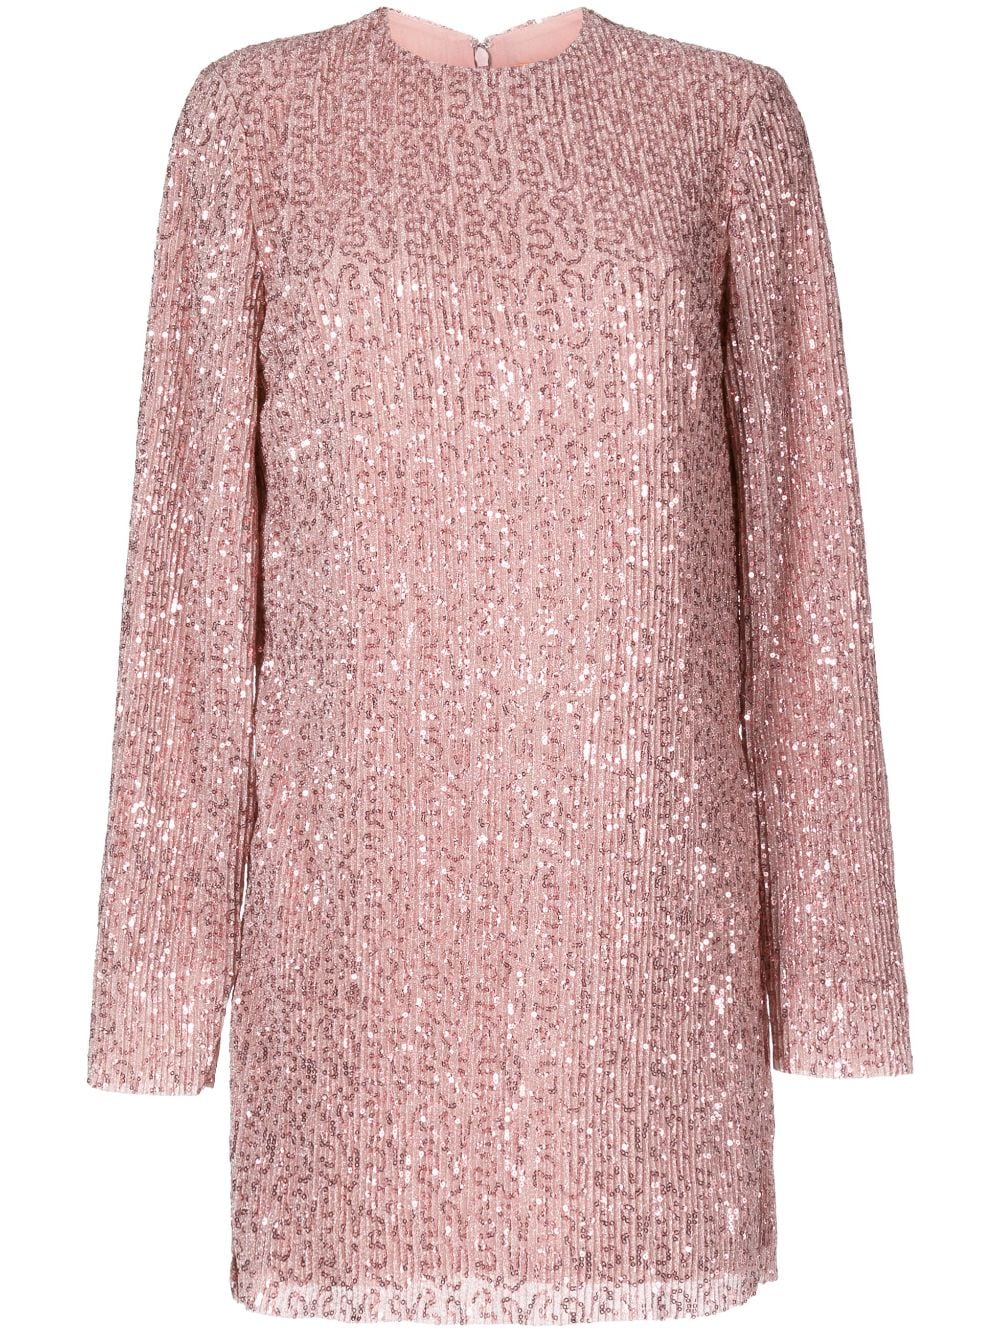 Stine Goya Heidi Sequin-embellished Knitted Top In Pink